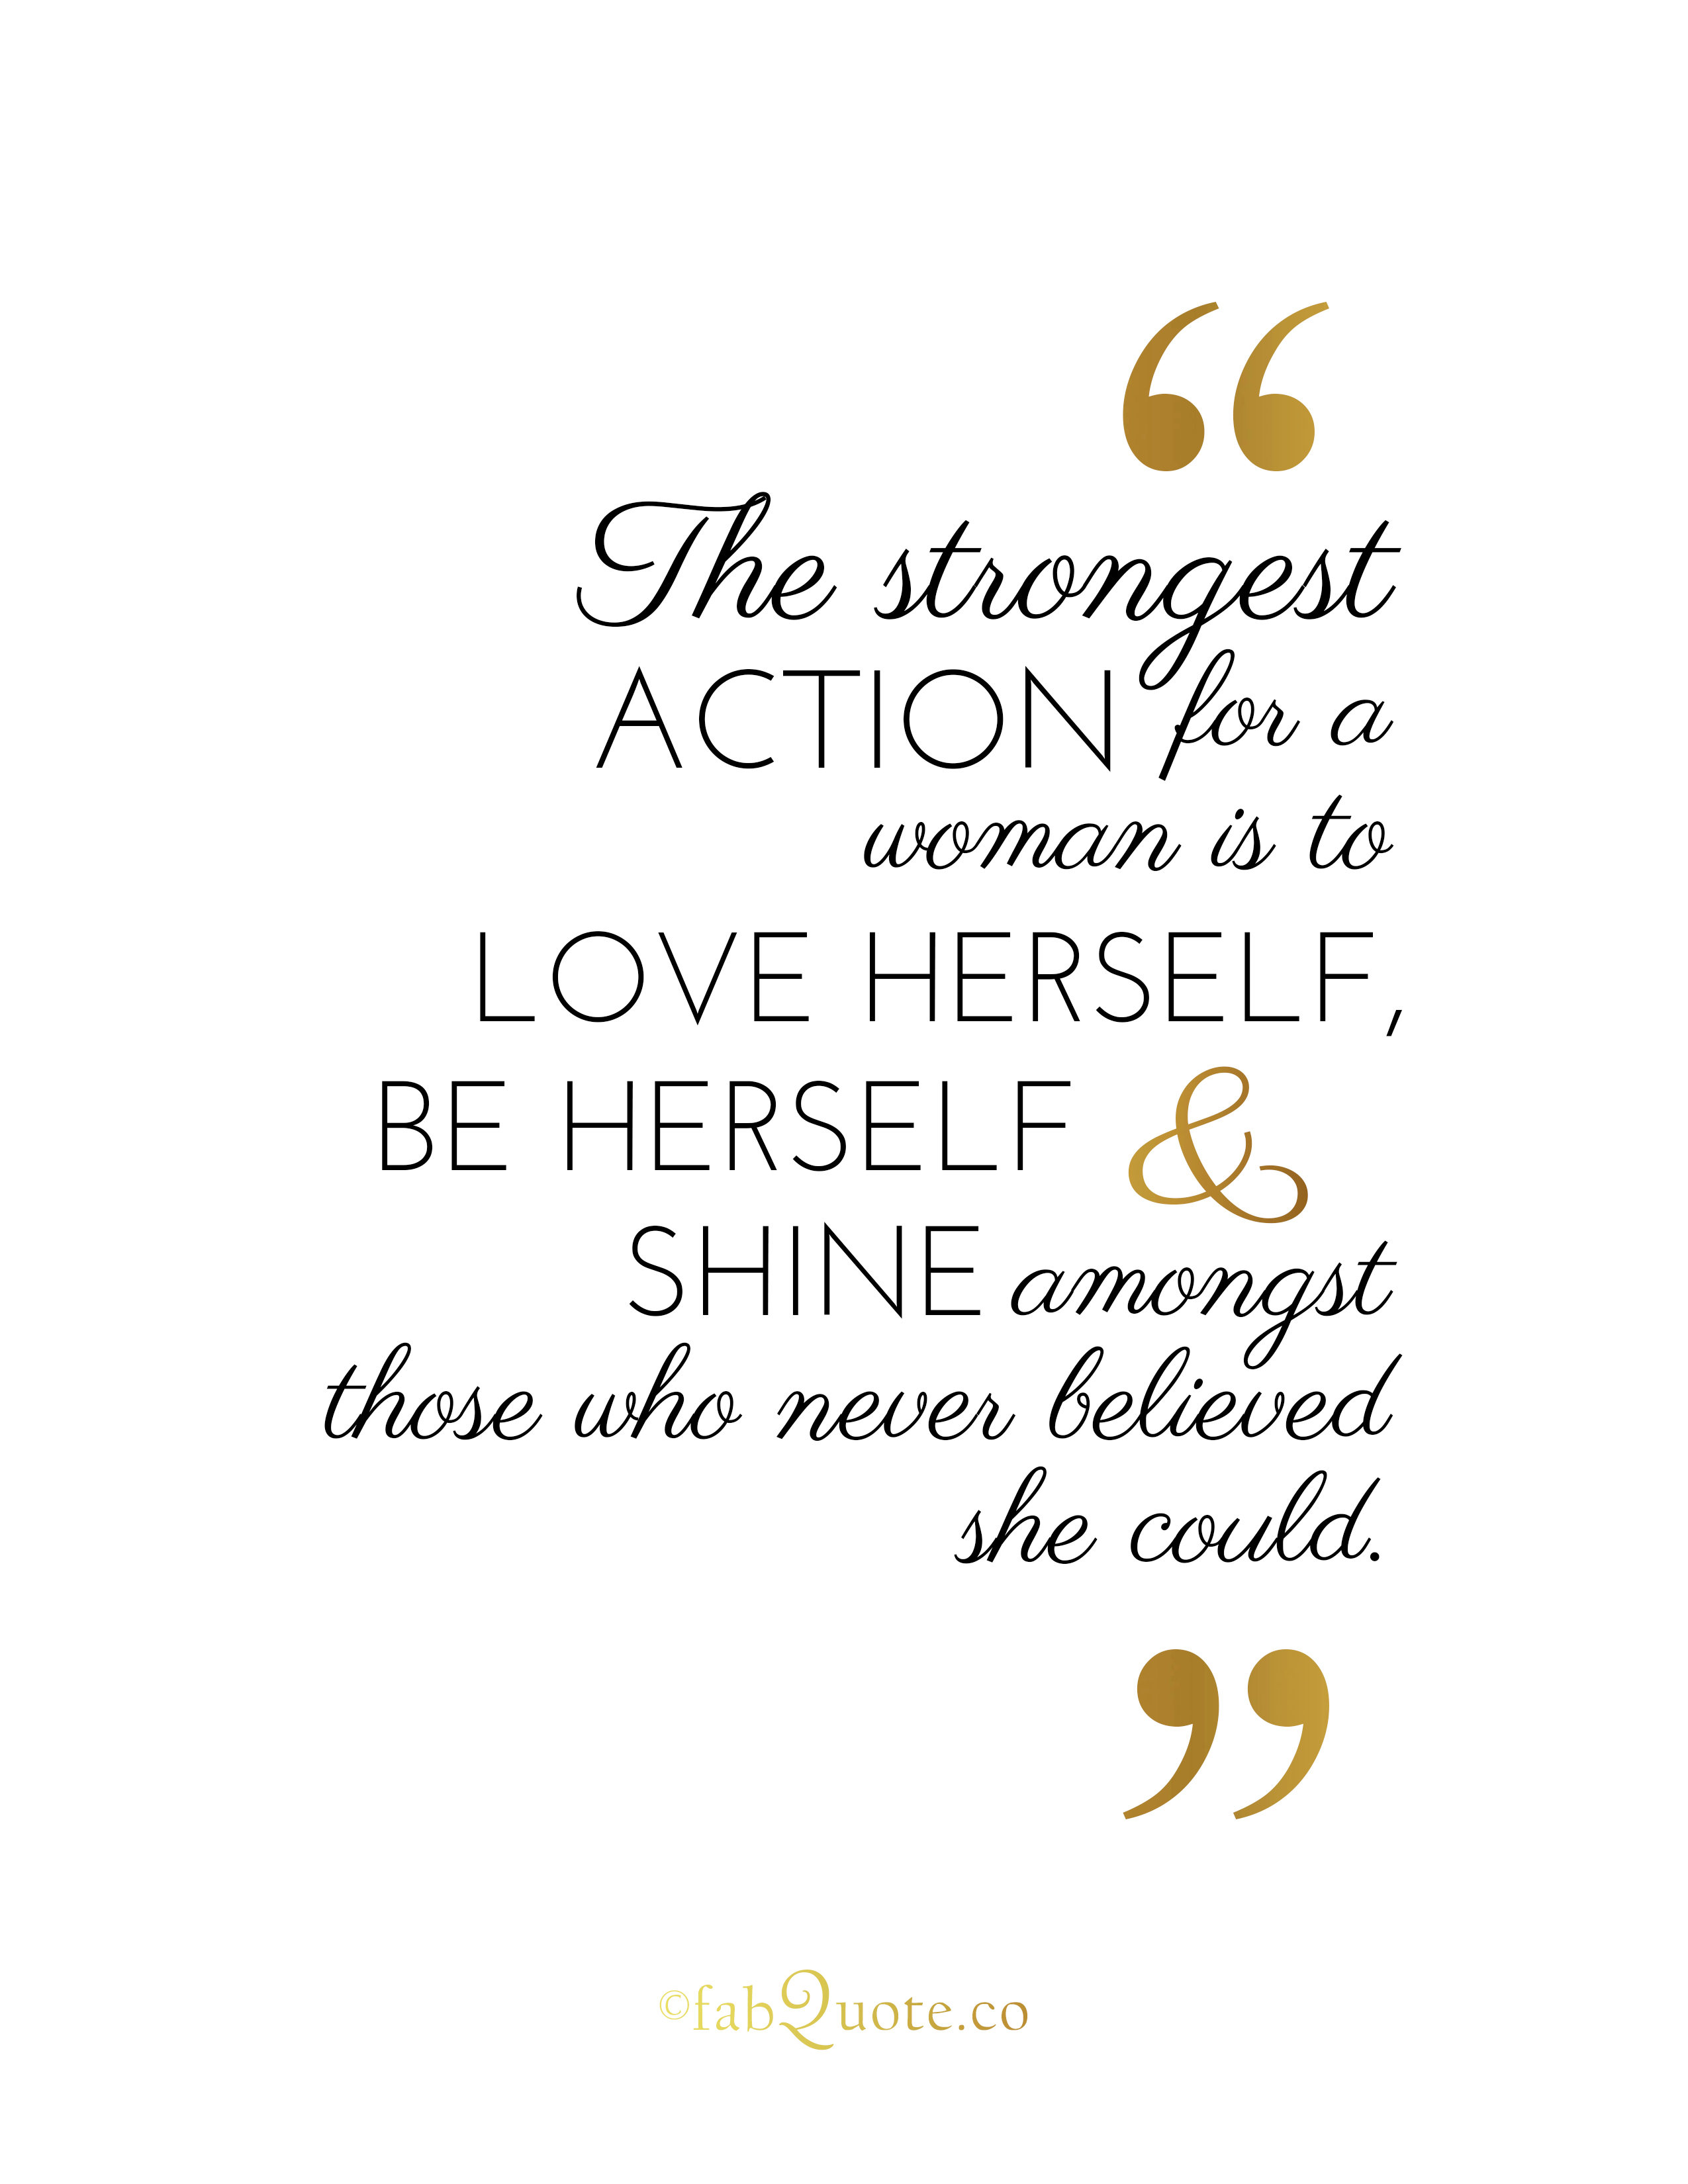 The strongest actions for a woman is to love herself, be herself and shine amongst those who never believed she could.